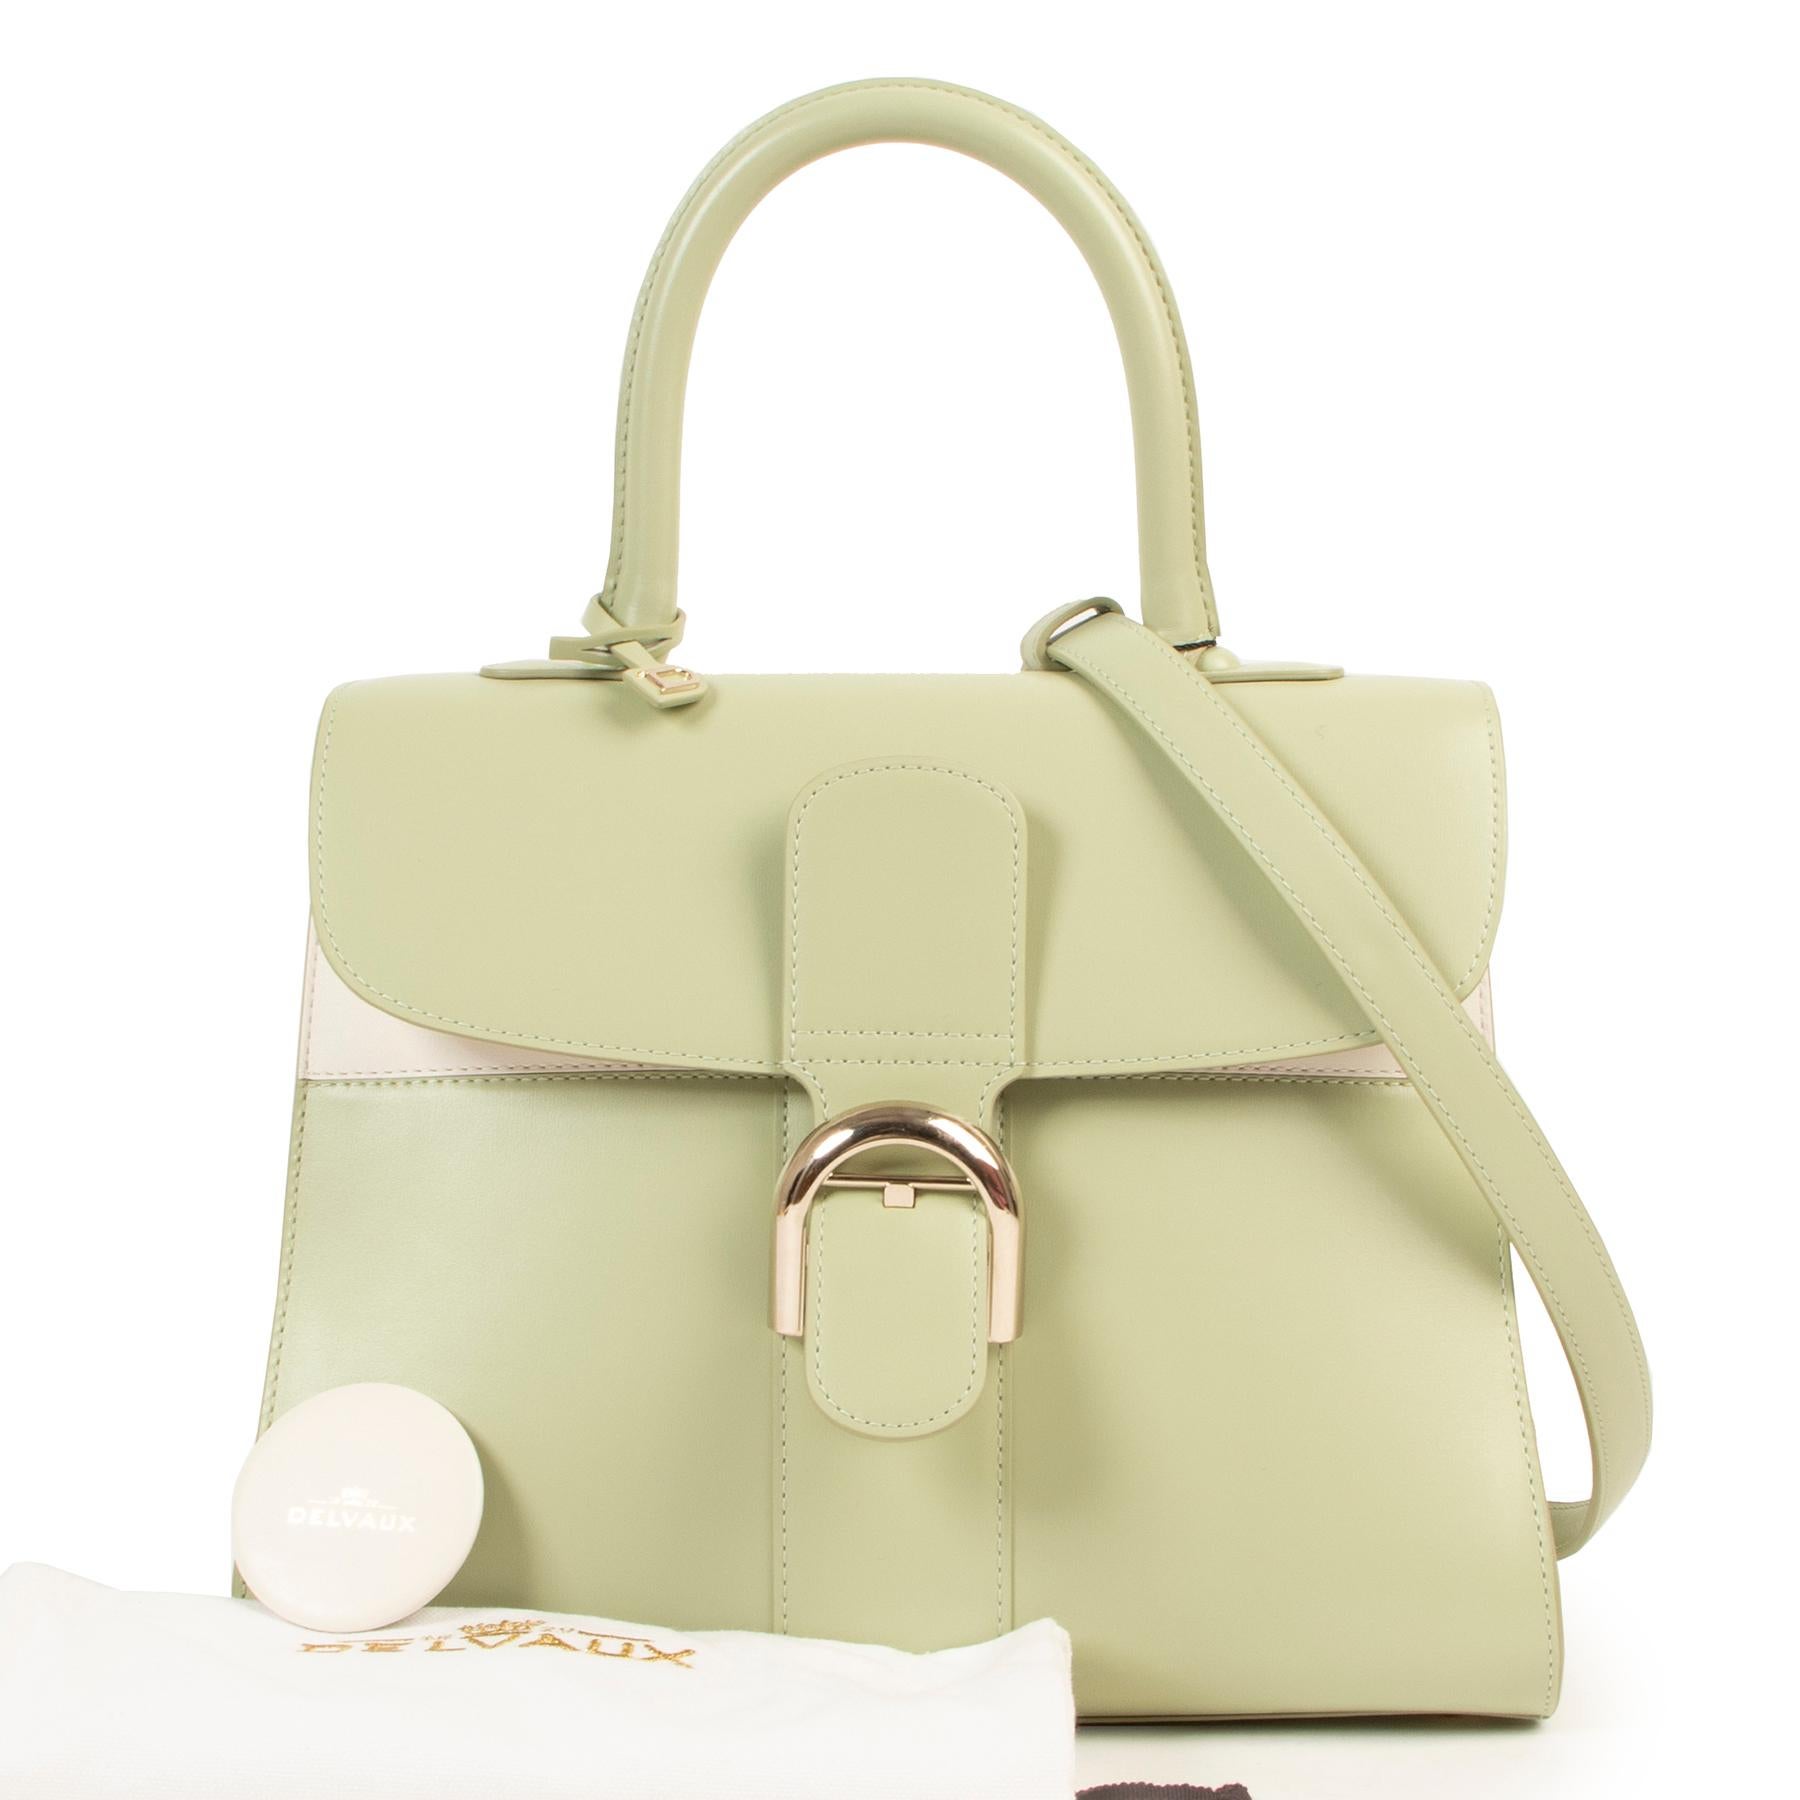 Delvaux Spring/Summer 2016 Brillant MM Mirage Amande/Ivory Limited Edition

Who doesn't want a bite of this Delvaux Brillant MM? The refreshing pisctachio green is absolutely delicious. Impeccably handmade from Box calfskin, the bag features a white